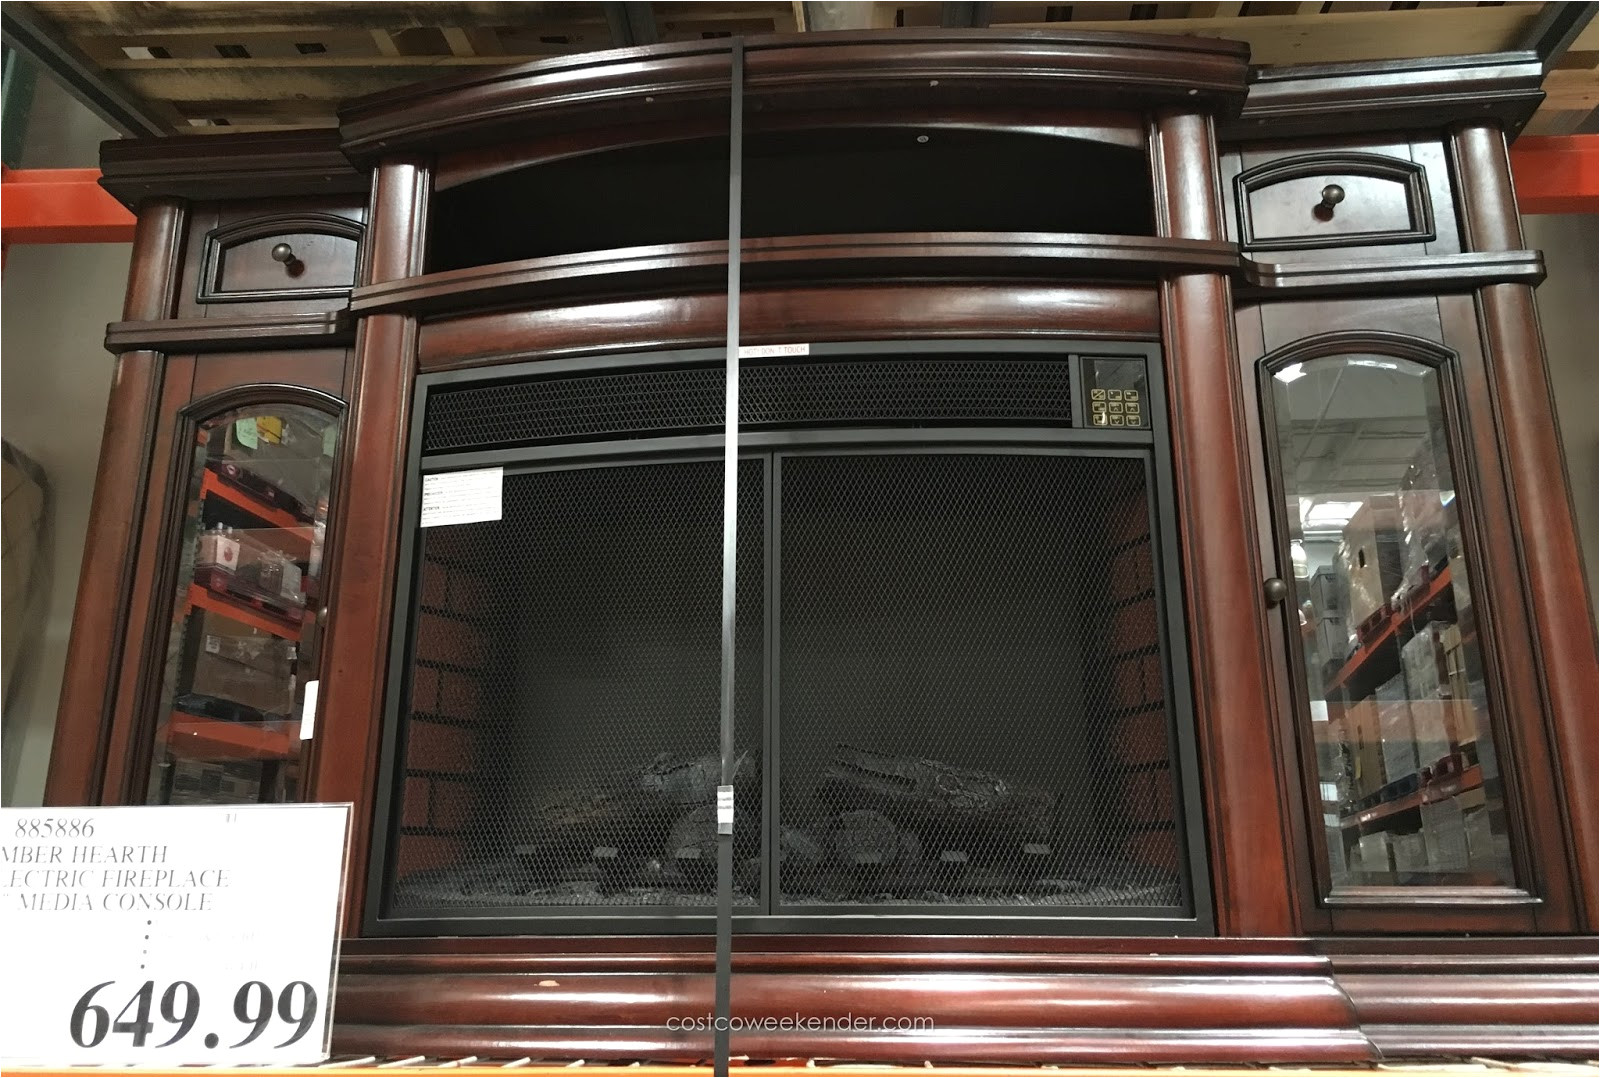 electric fireplace costco amazing ember hearth media weekender within 15